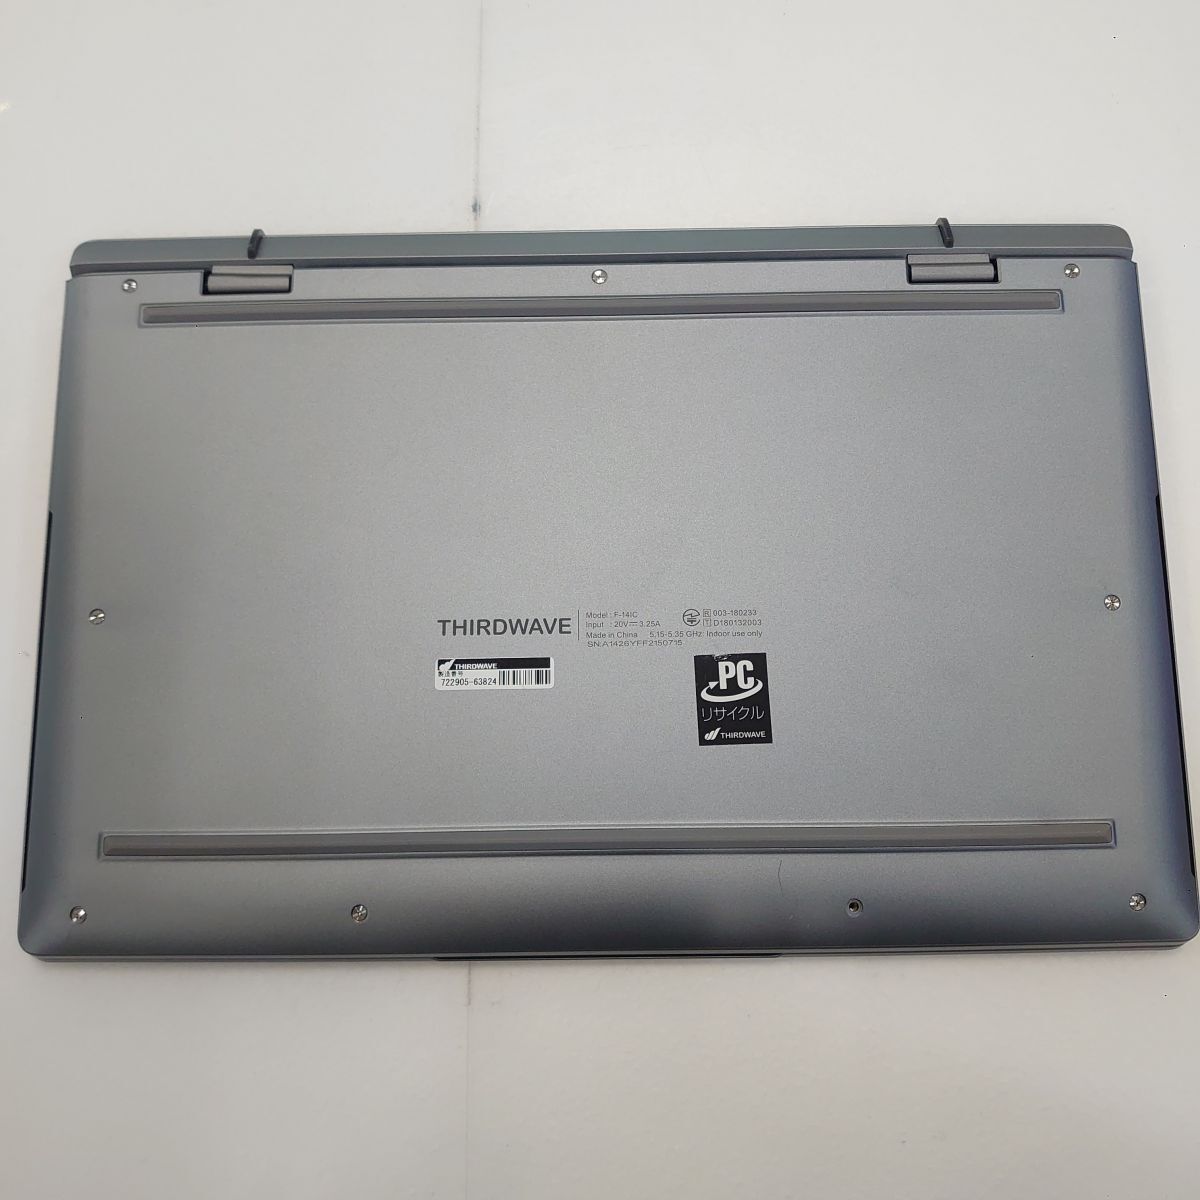 PC.1 jpy [ Junk ] THIDWAVE F-14IC 722905-63824 Core i5-1035G1 memory 16GB 14 -inch T010581[ translation have ]